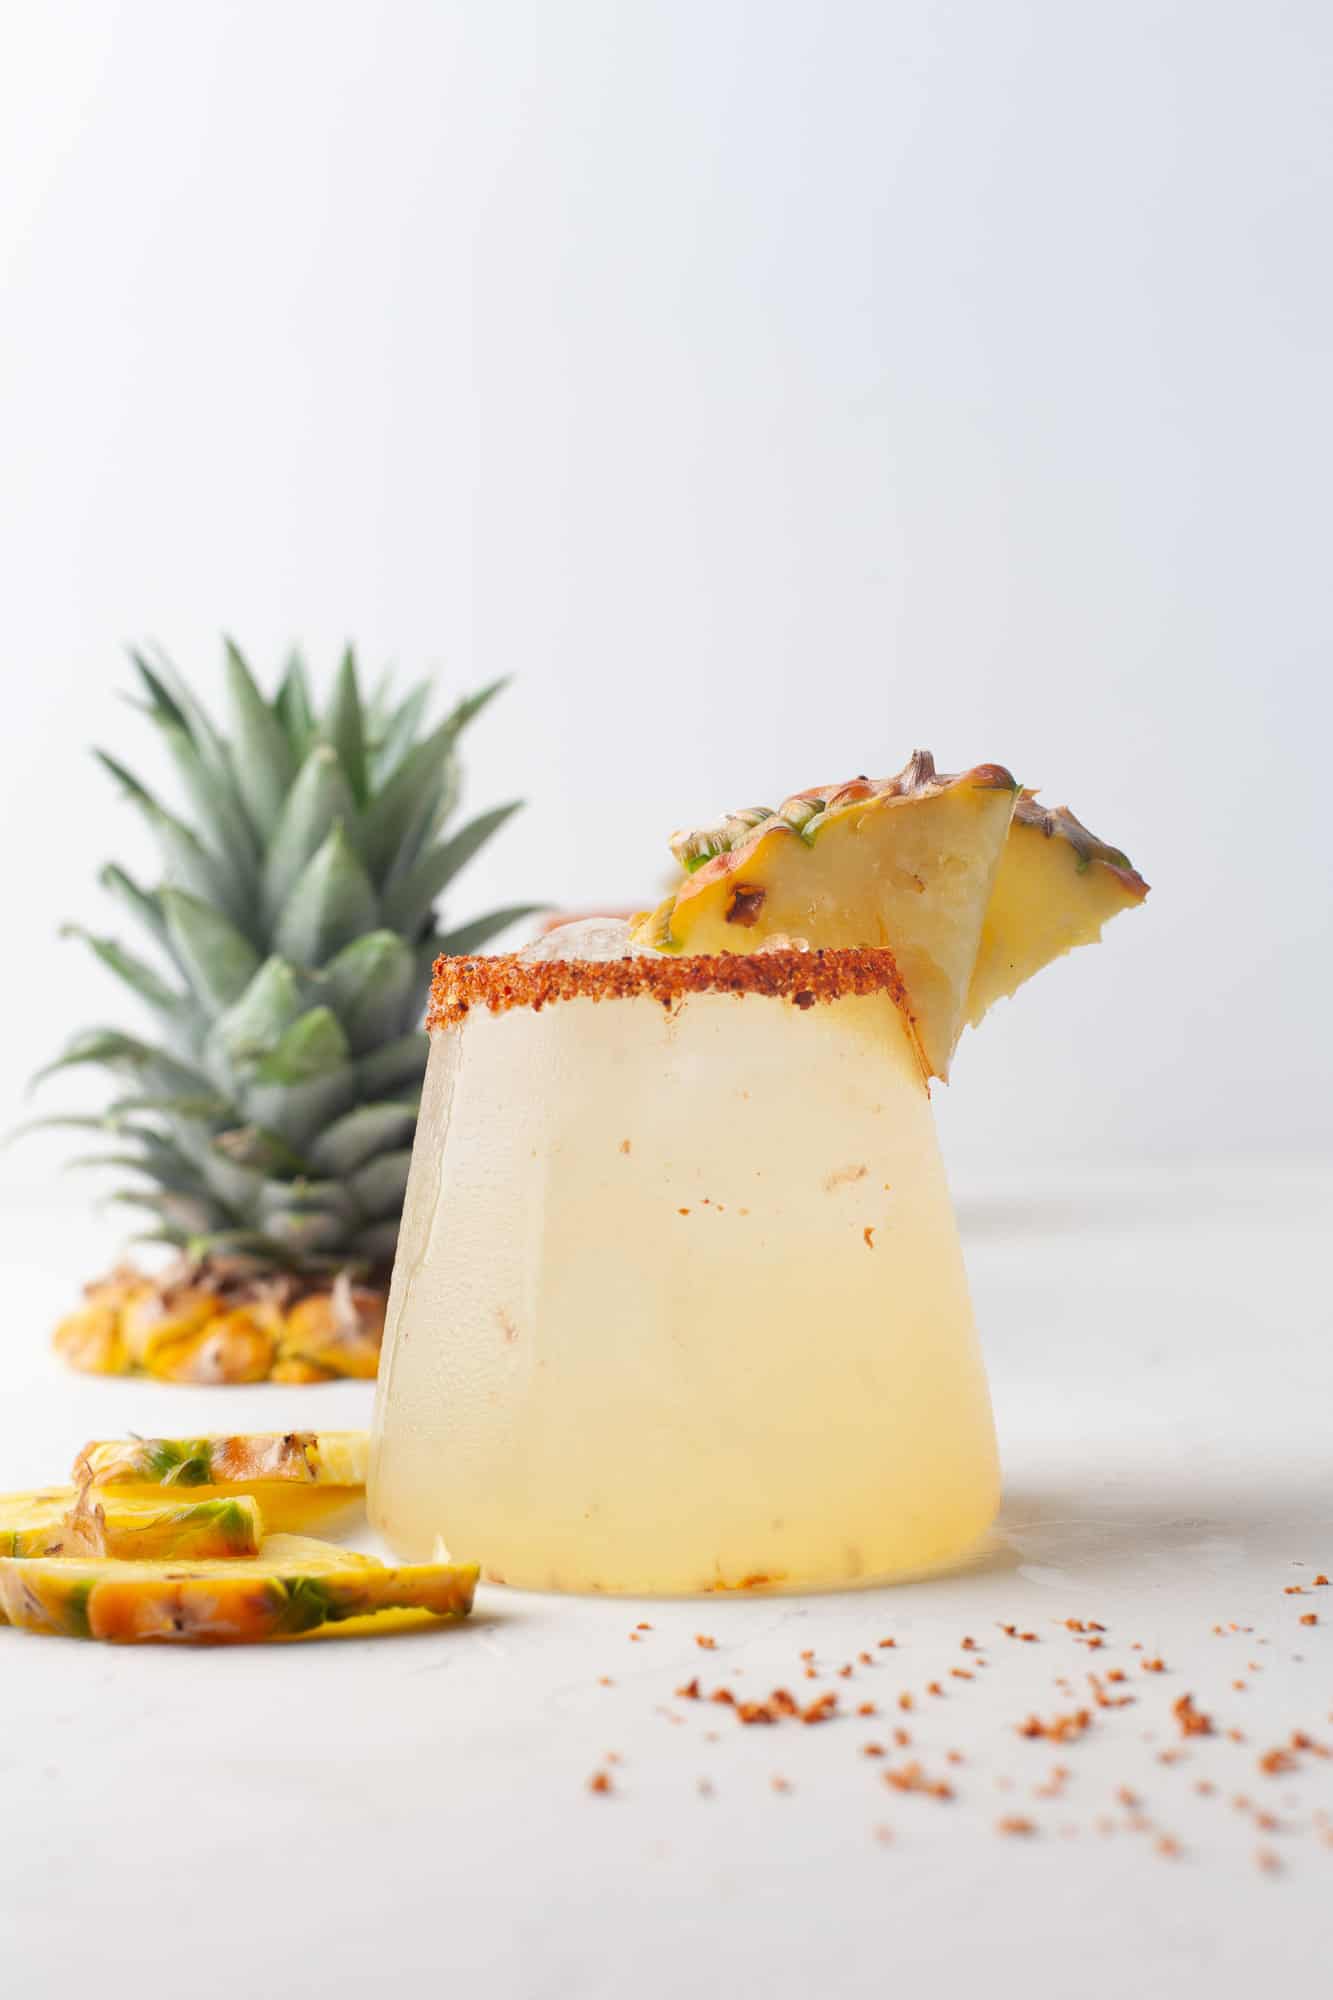 Pineapple margarita with pineapple top in background.